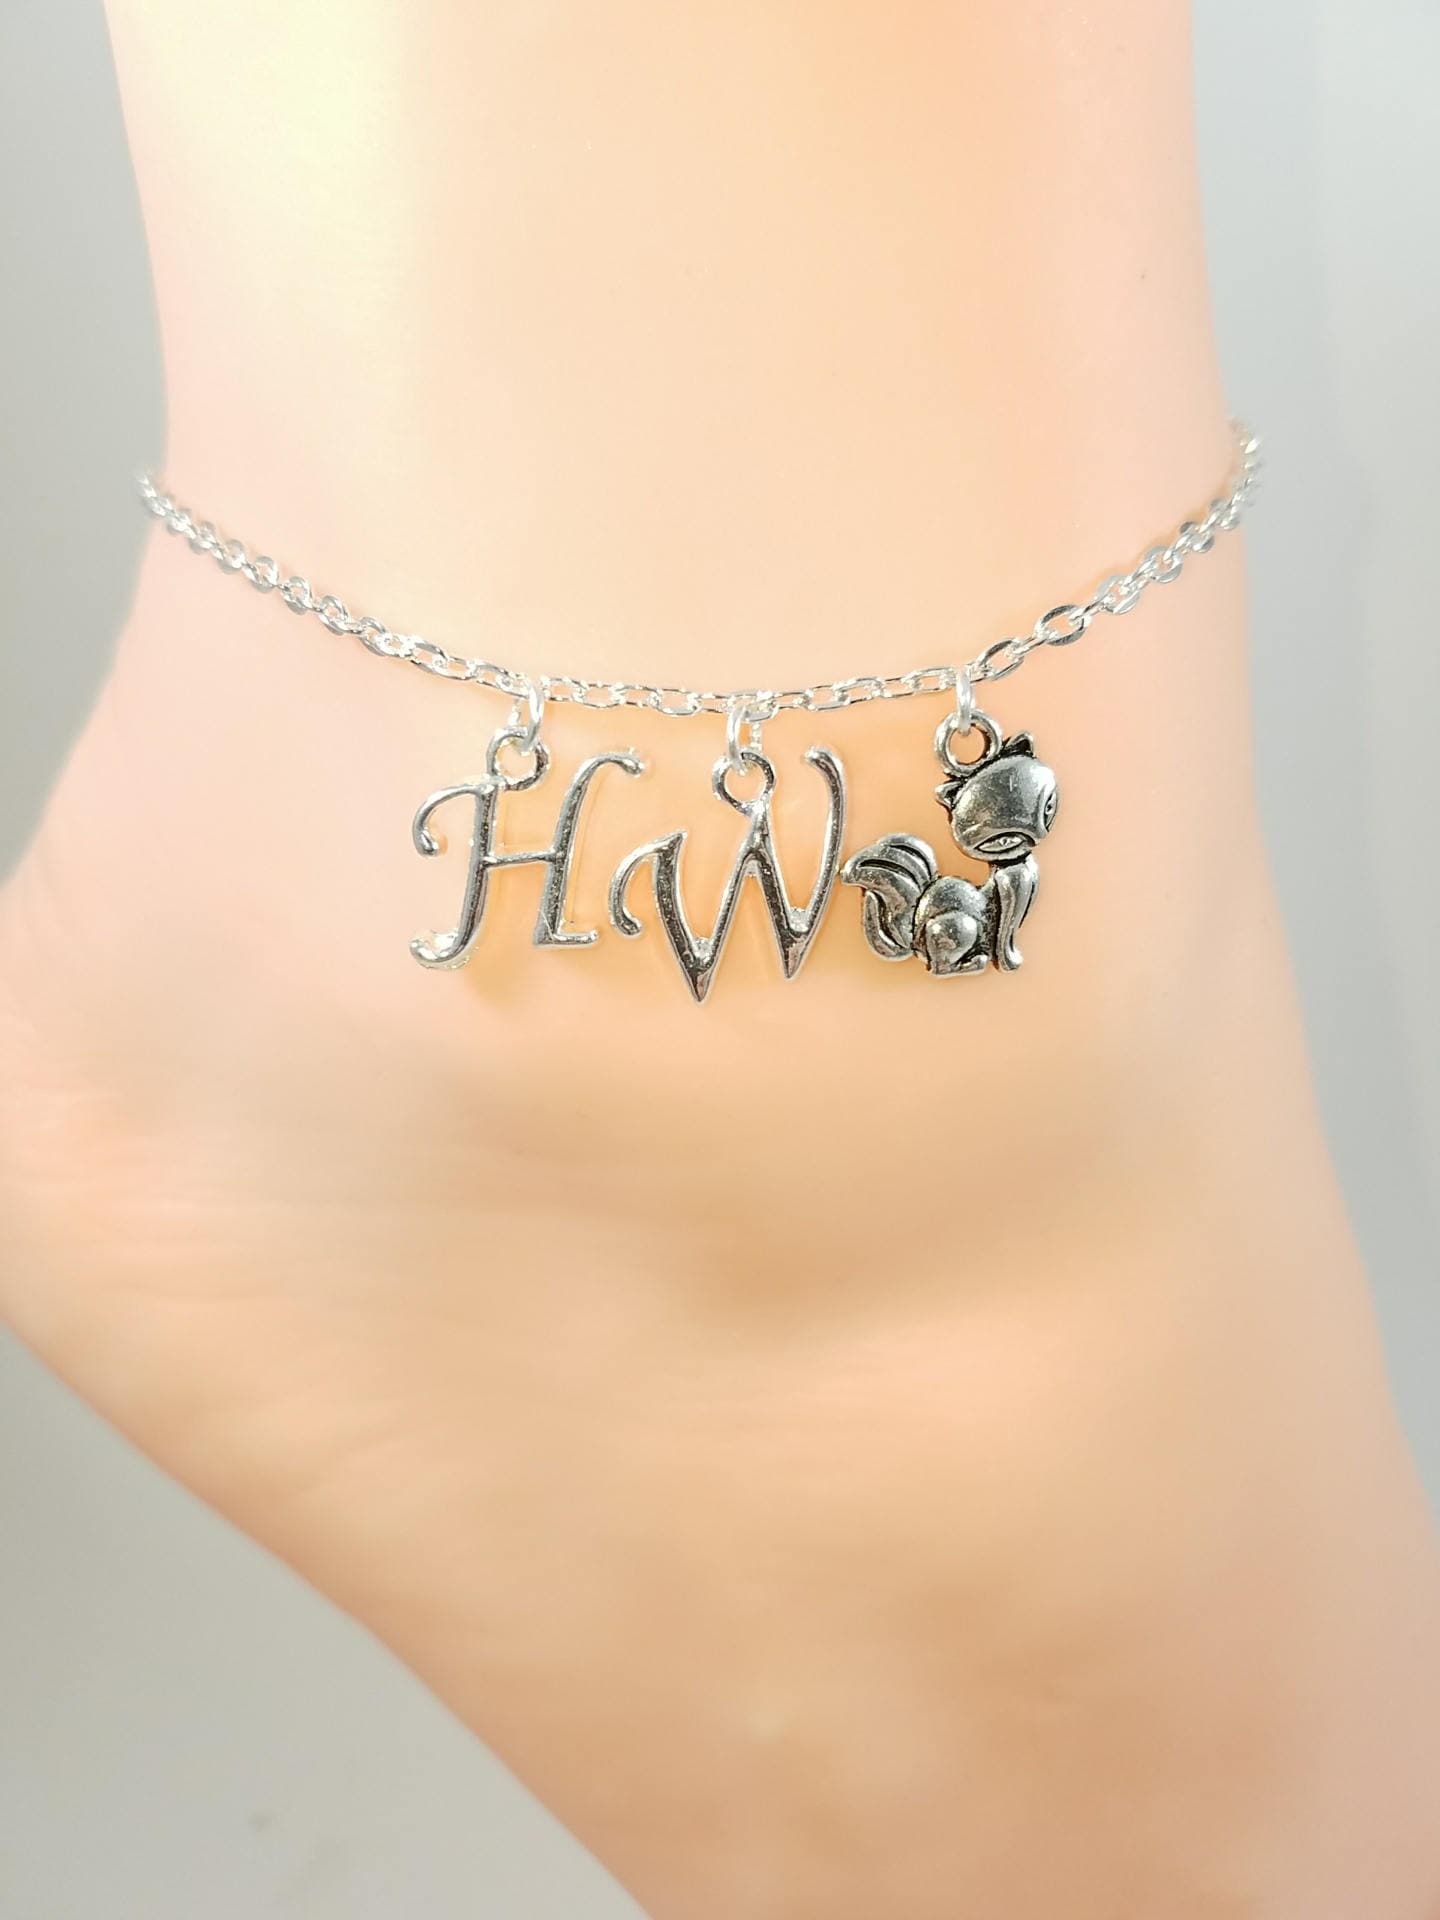 Vixen Hotwife Anklet, Sterling Silver Chain, Initial Jewelry, Personalized Jewelry, Sexy Anklets, Swinger Jewelry, Kinky